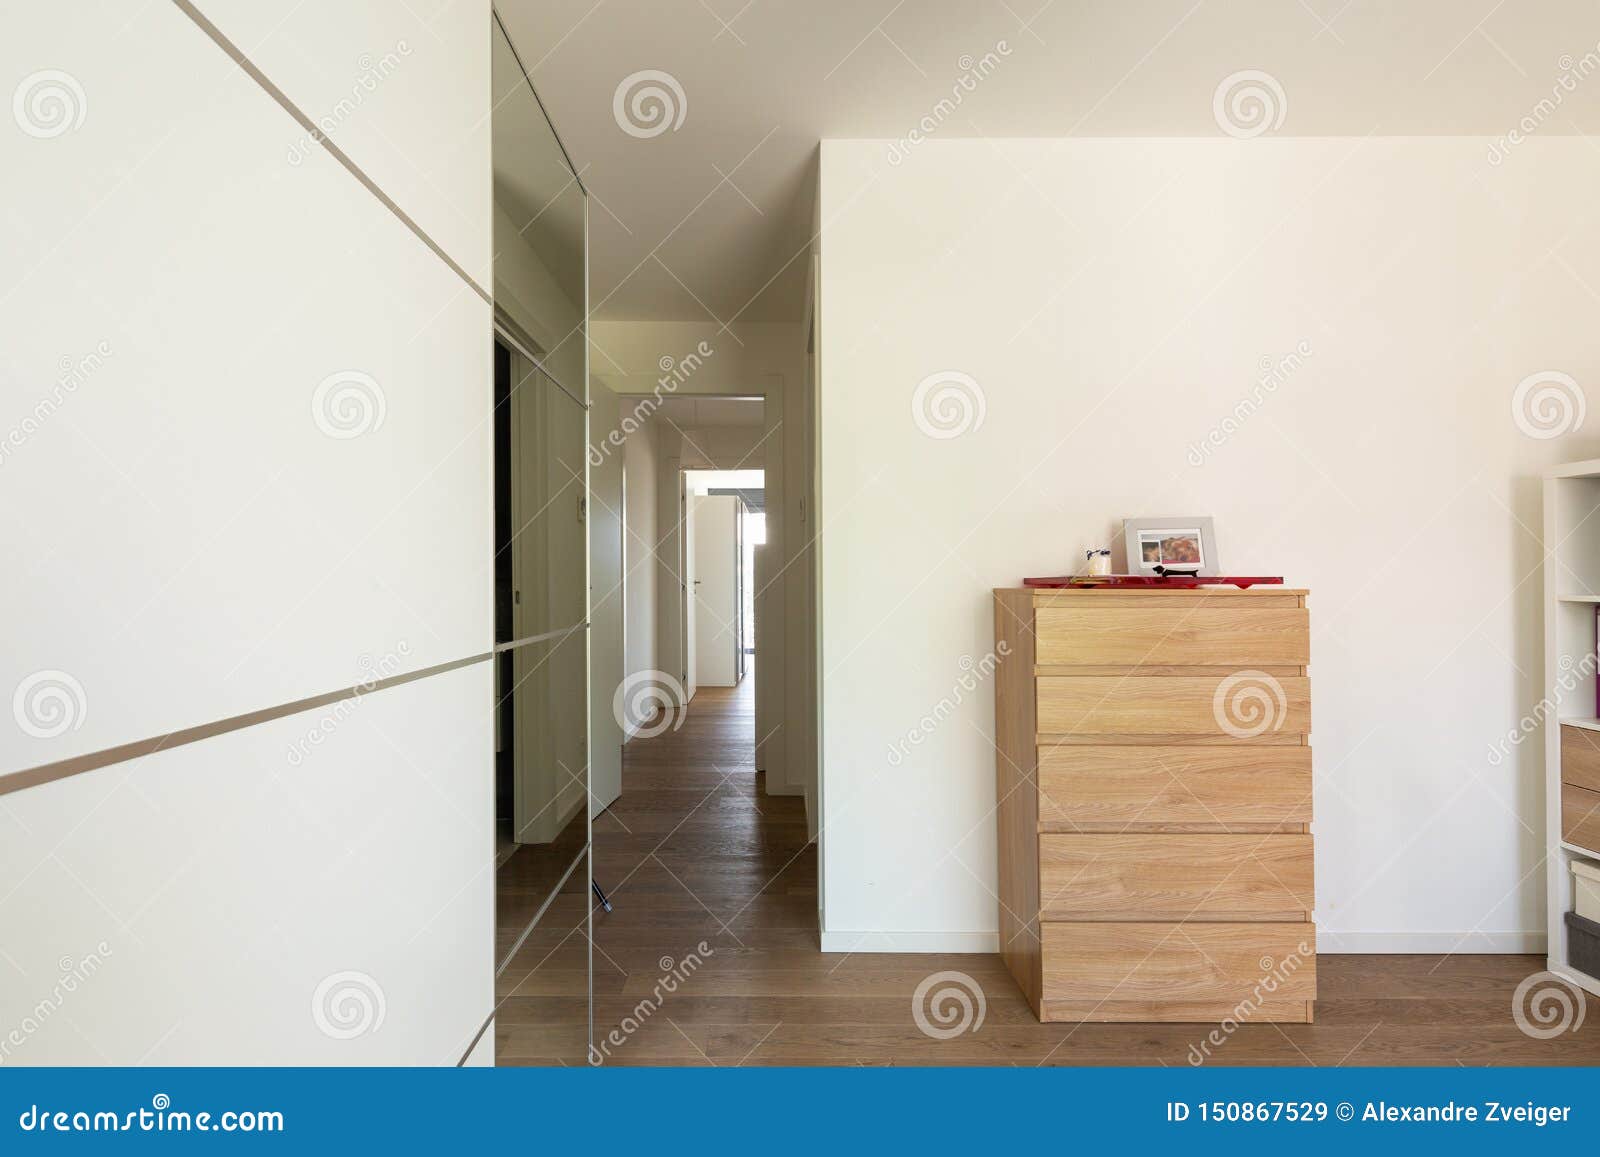 Room Detail With Wardrobe Chest Of Drawers And Hallway Stock